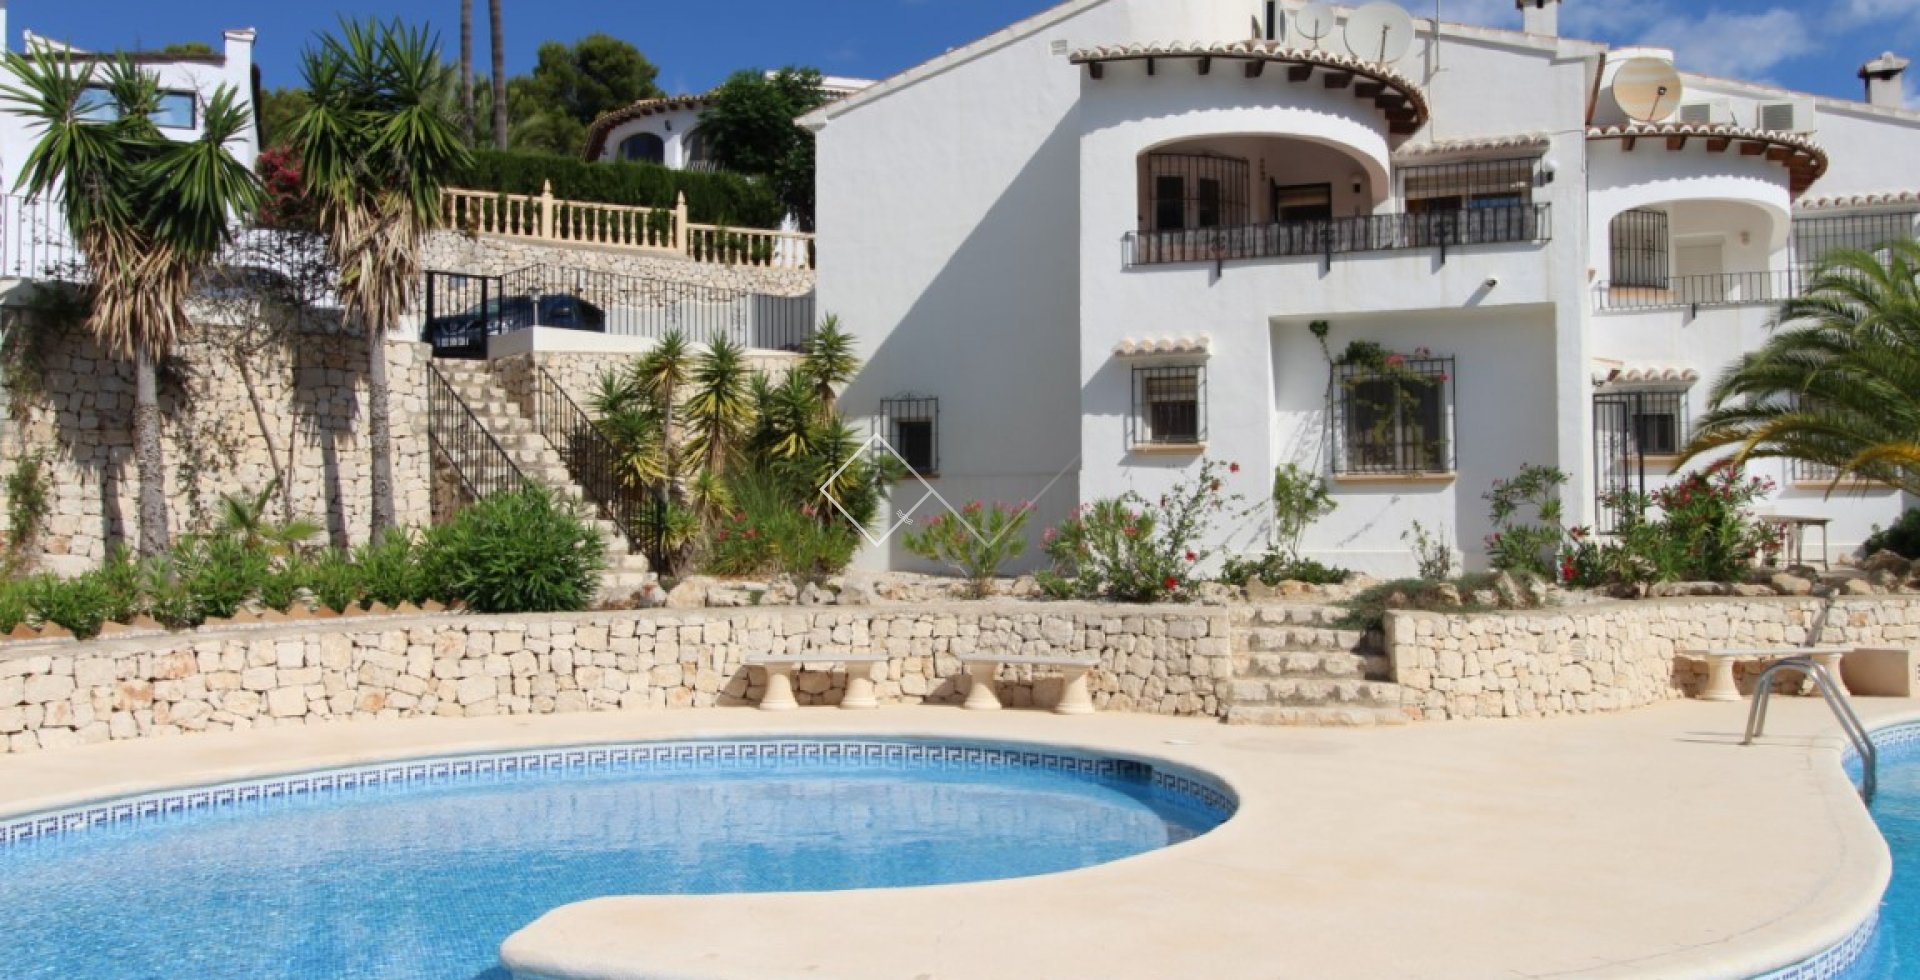 Beautiful corner house, south-east facing, in Los Alcazares with view of the communal pool and beautiful open view to El Portet and the sea